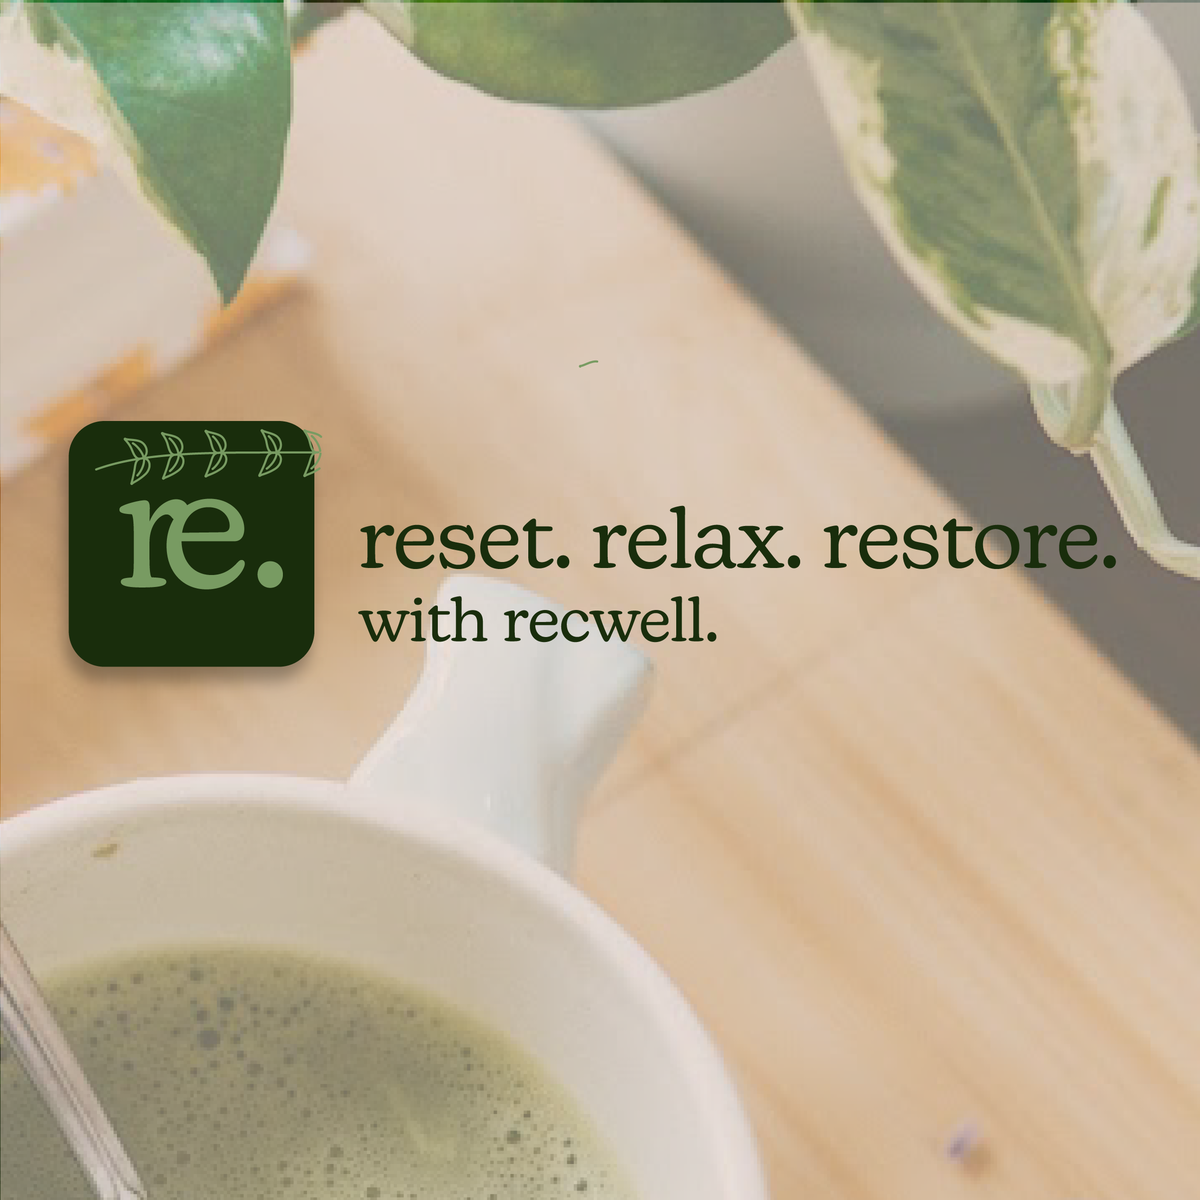 reset. relax. restore. with recwell text over a green tea and plant image